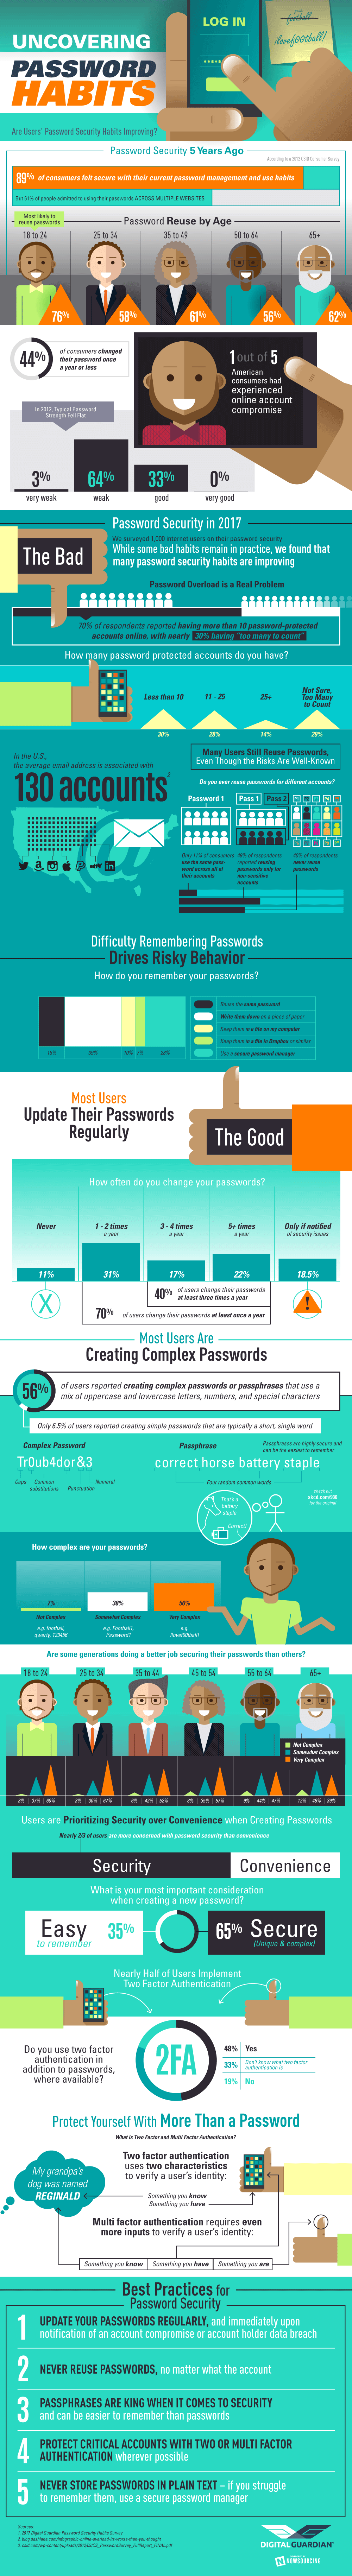 Password Security Habits Infographic by Digital Guardian